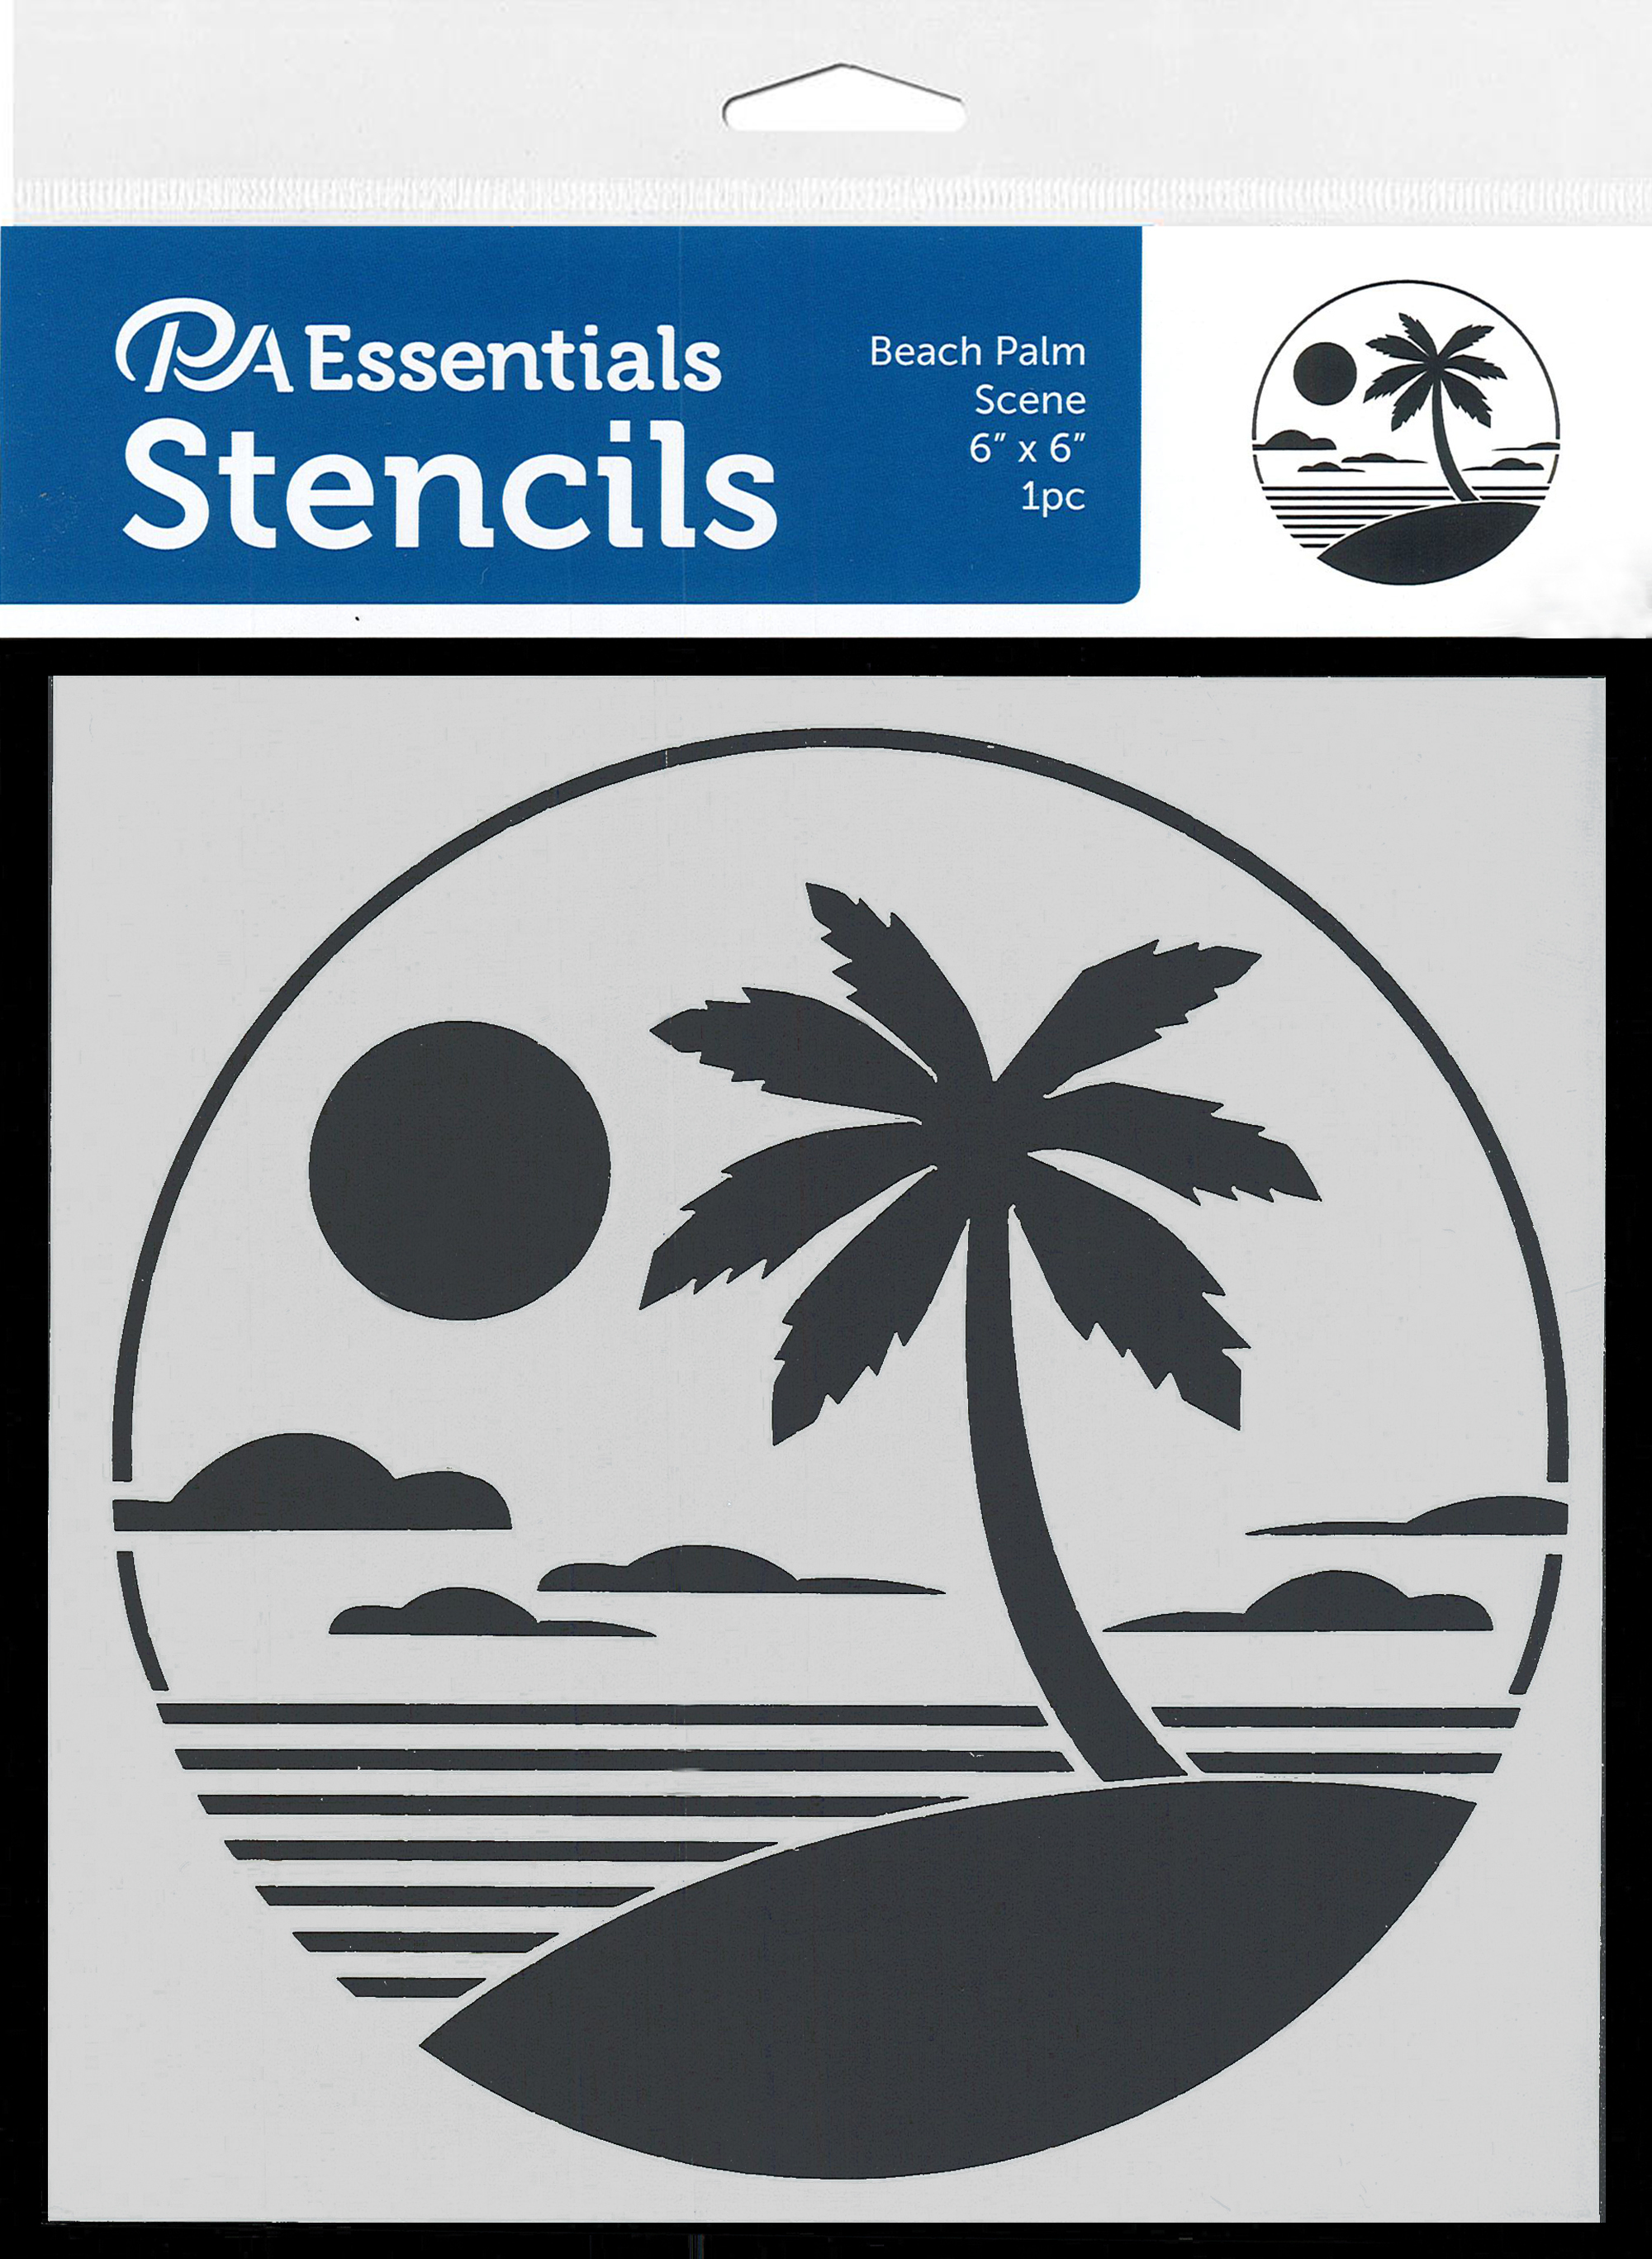 PA Essentials Stencil Tropical Animals for Painting on Wood